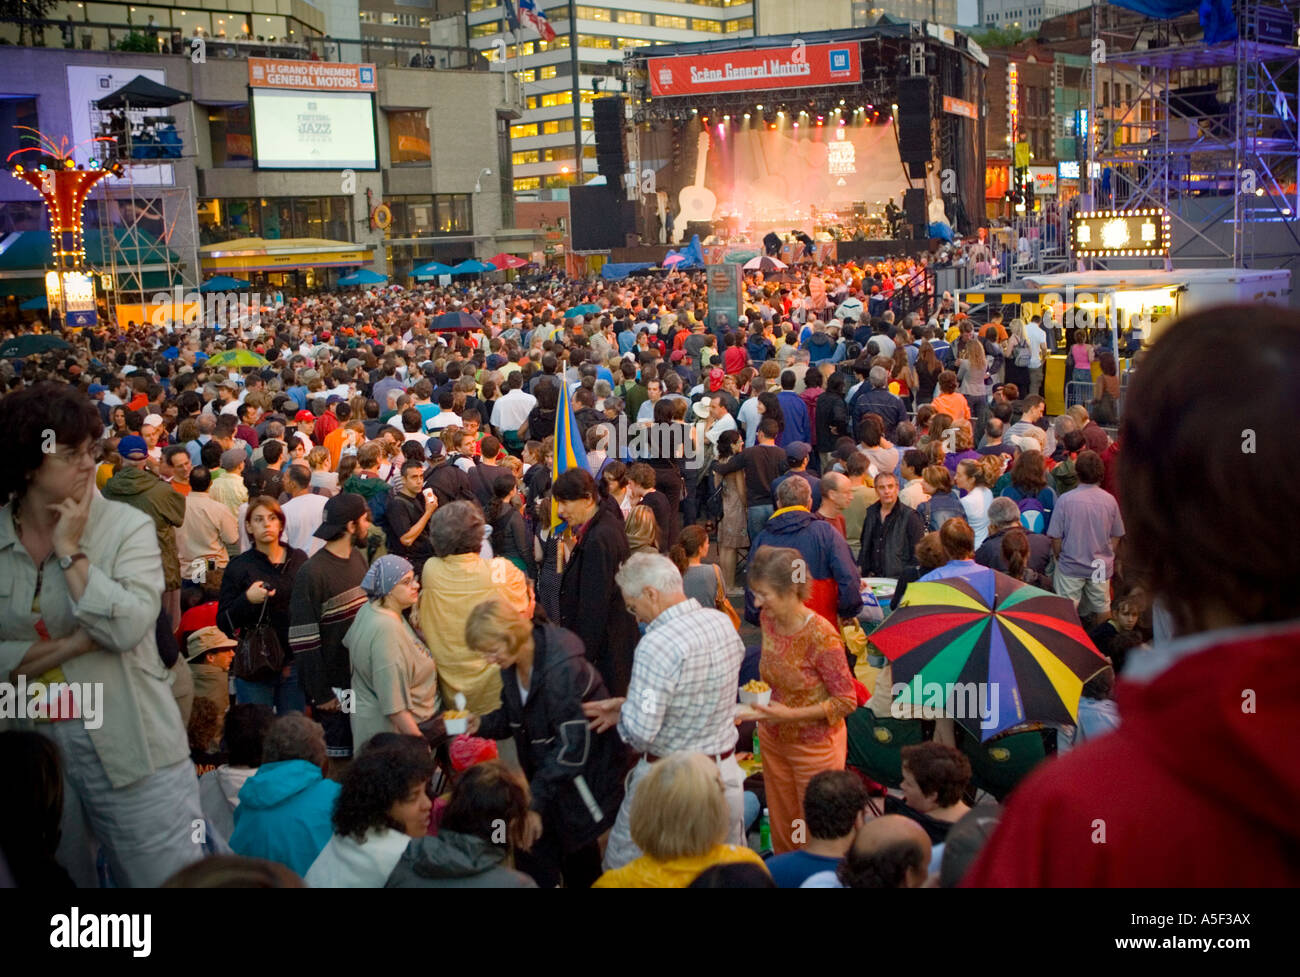 Crowds attending an evening performance at an outdoor music festival in Montreal. Stock Photo